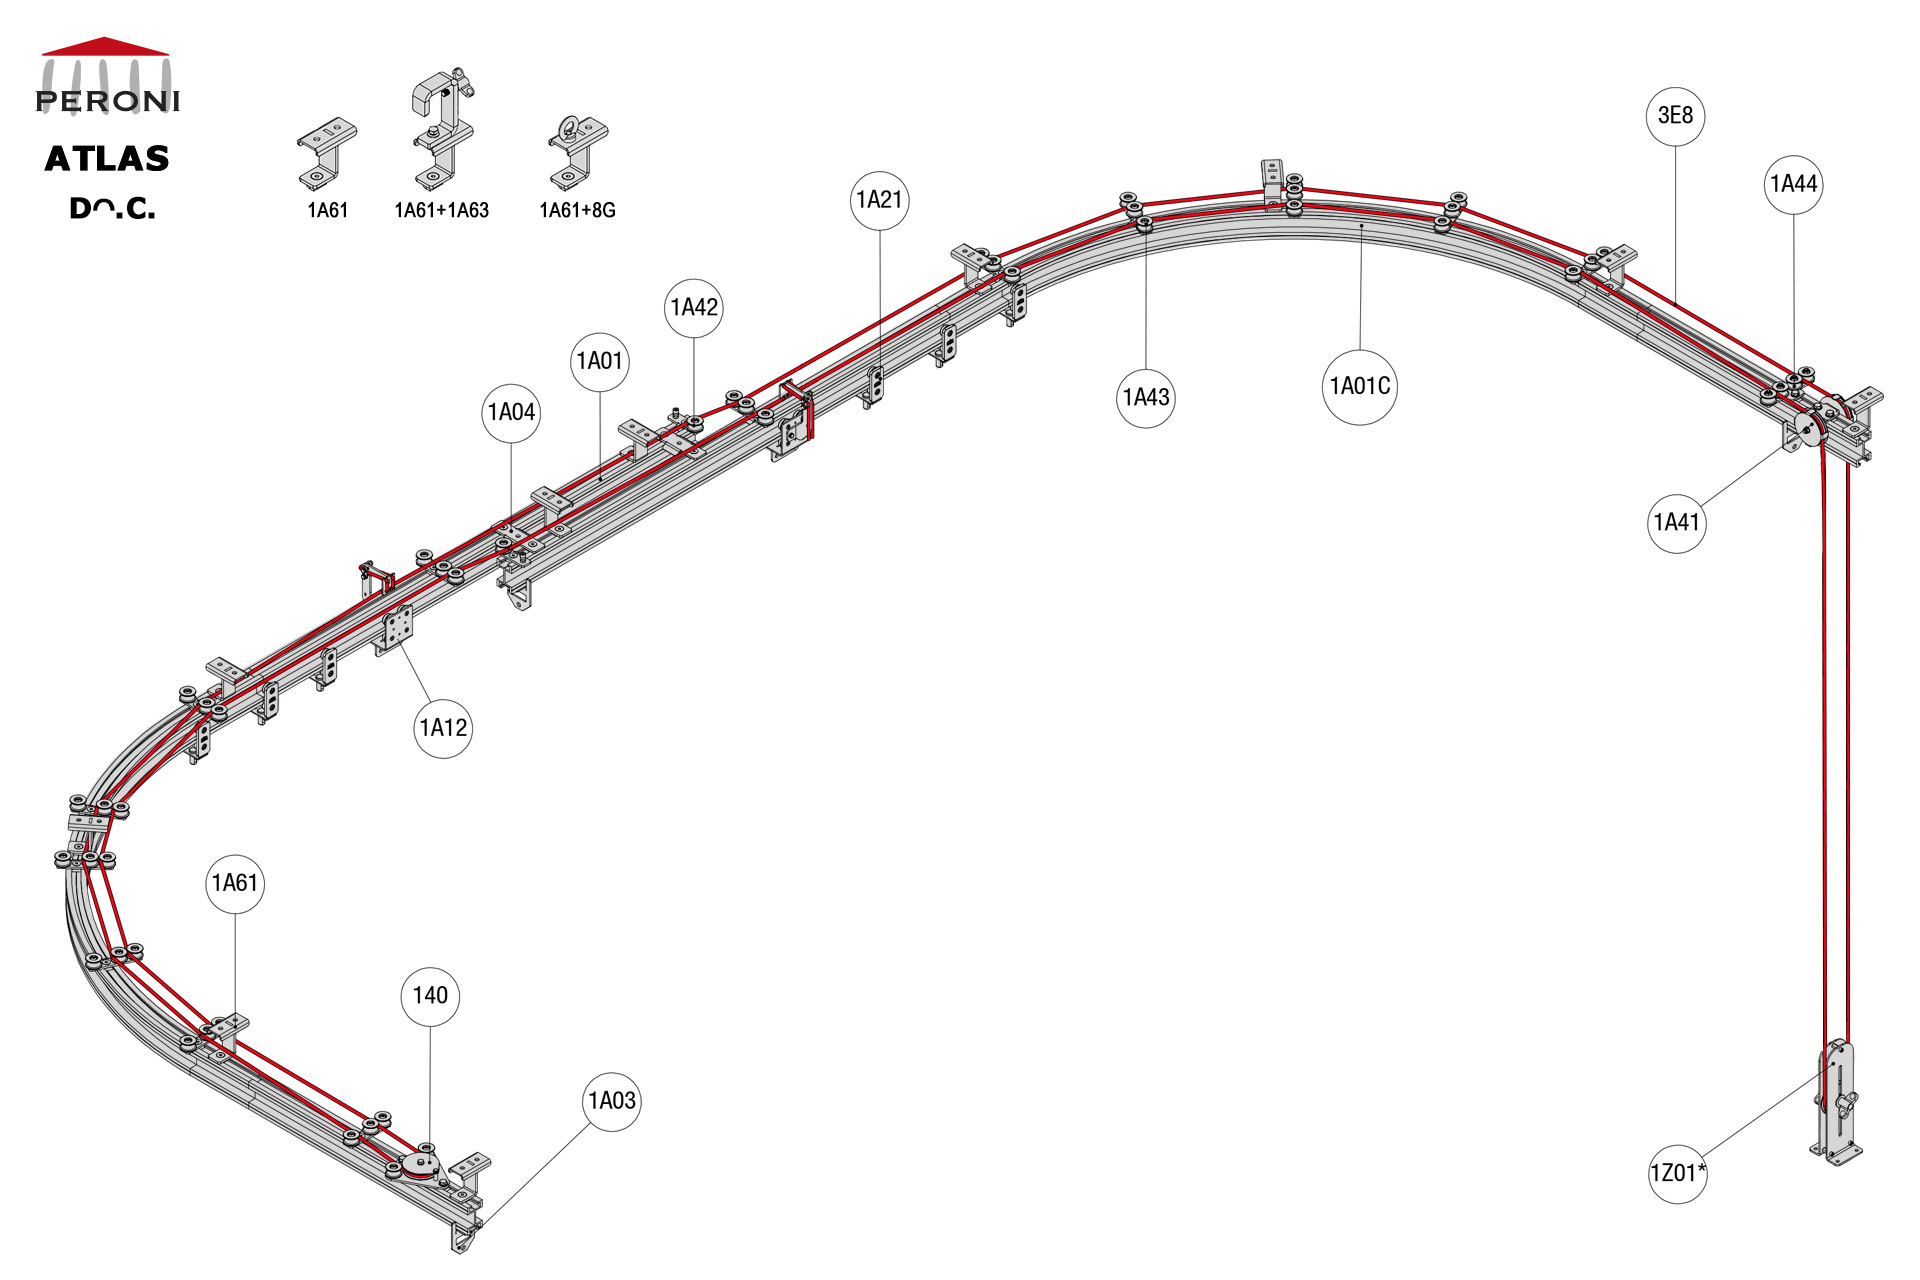 Dᴖ.C. configuration track Dᴖ. Curved double rail central openingC. Corded manualcentral overlap exceeding 50 cmComponents1A01 - Straight rail1A01C - Curved rail1A02 - Connection set1A03 - End stop1A04 - Overlap bridge1A12 - Top cord master carrier1A20 - 2 Wheel runnerMotion control1A40 - Return pulley1A41 - Head double pulley1A42 - Top cord guide for overlap1A43 - Top cord guide1A44 - Top cord aligner1Z01 - See all options3E - Poly rope  8 mm